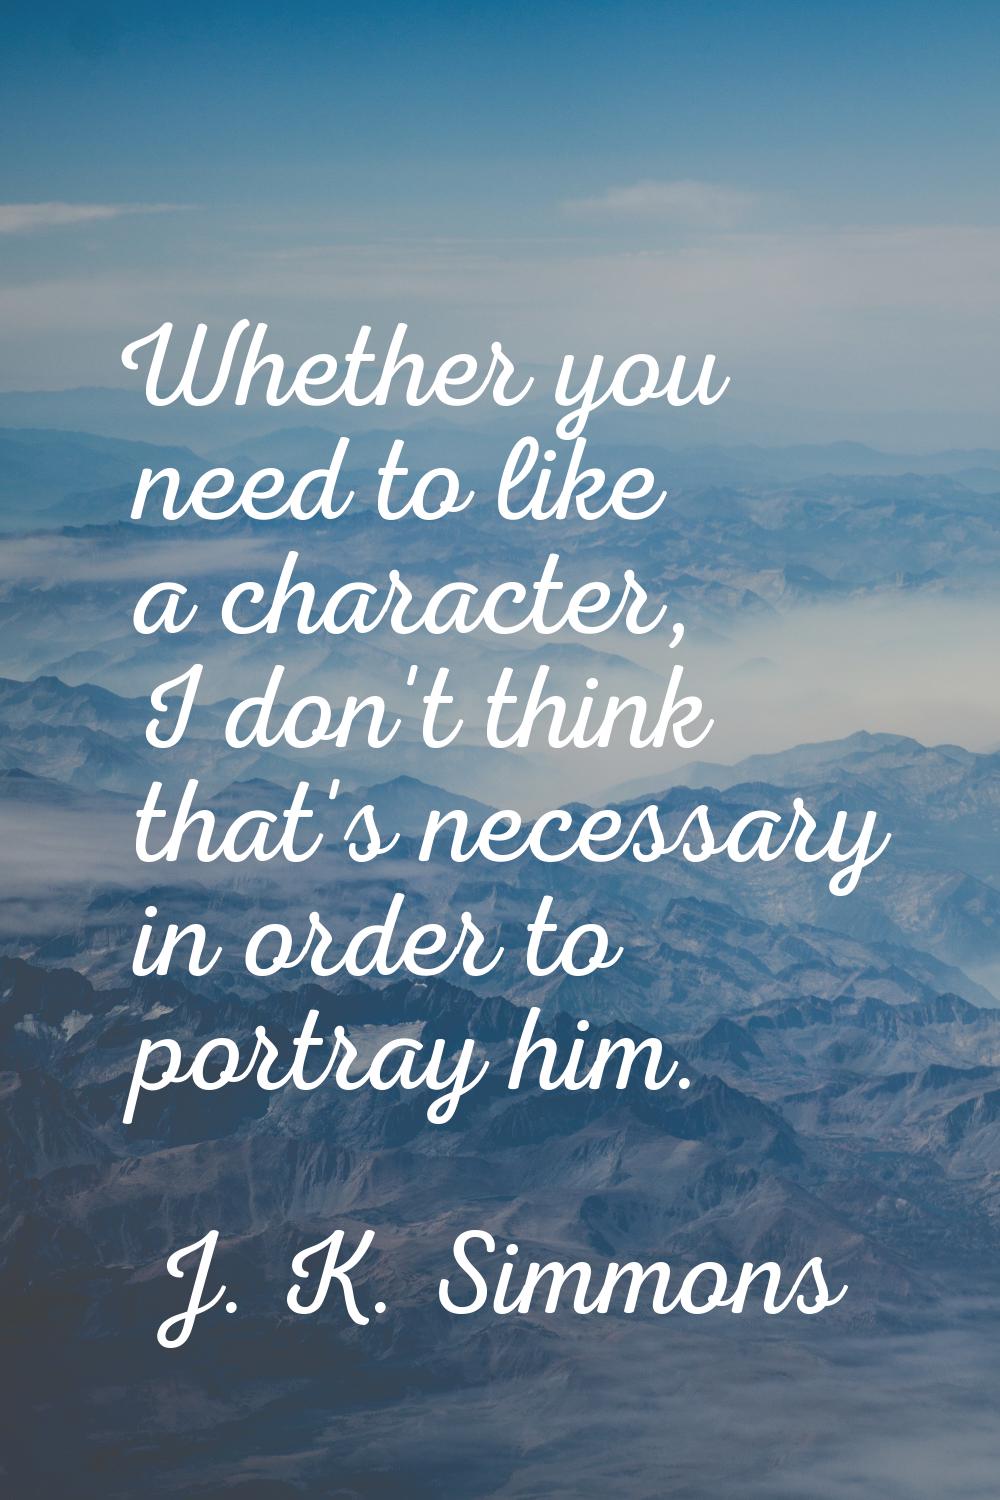 Whether you need to like a character, I don't think that's necessary in order to portray him.